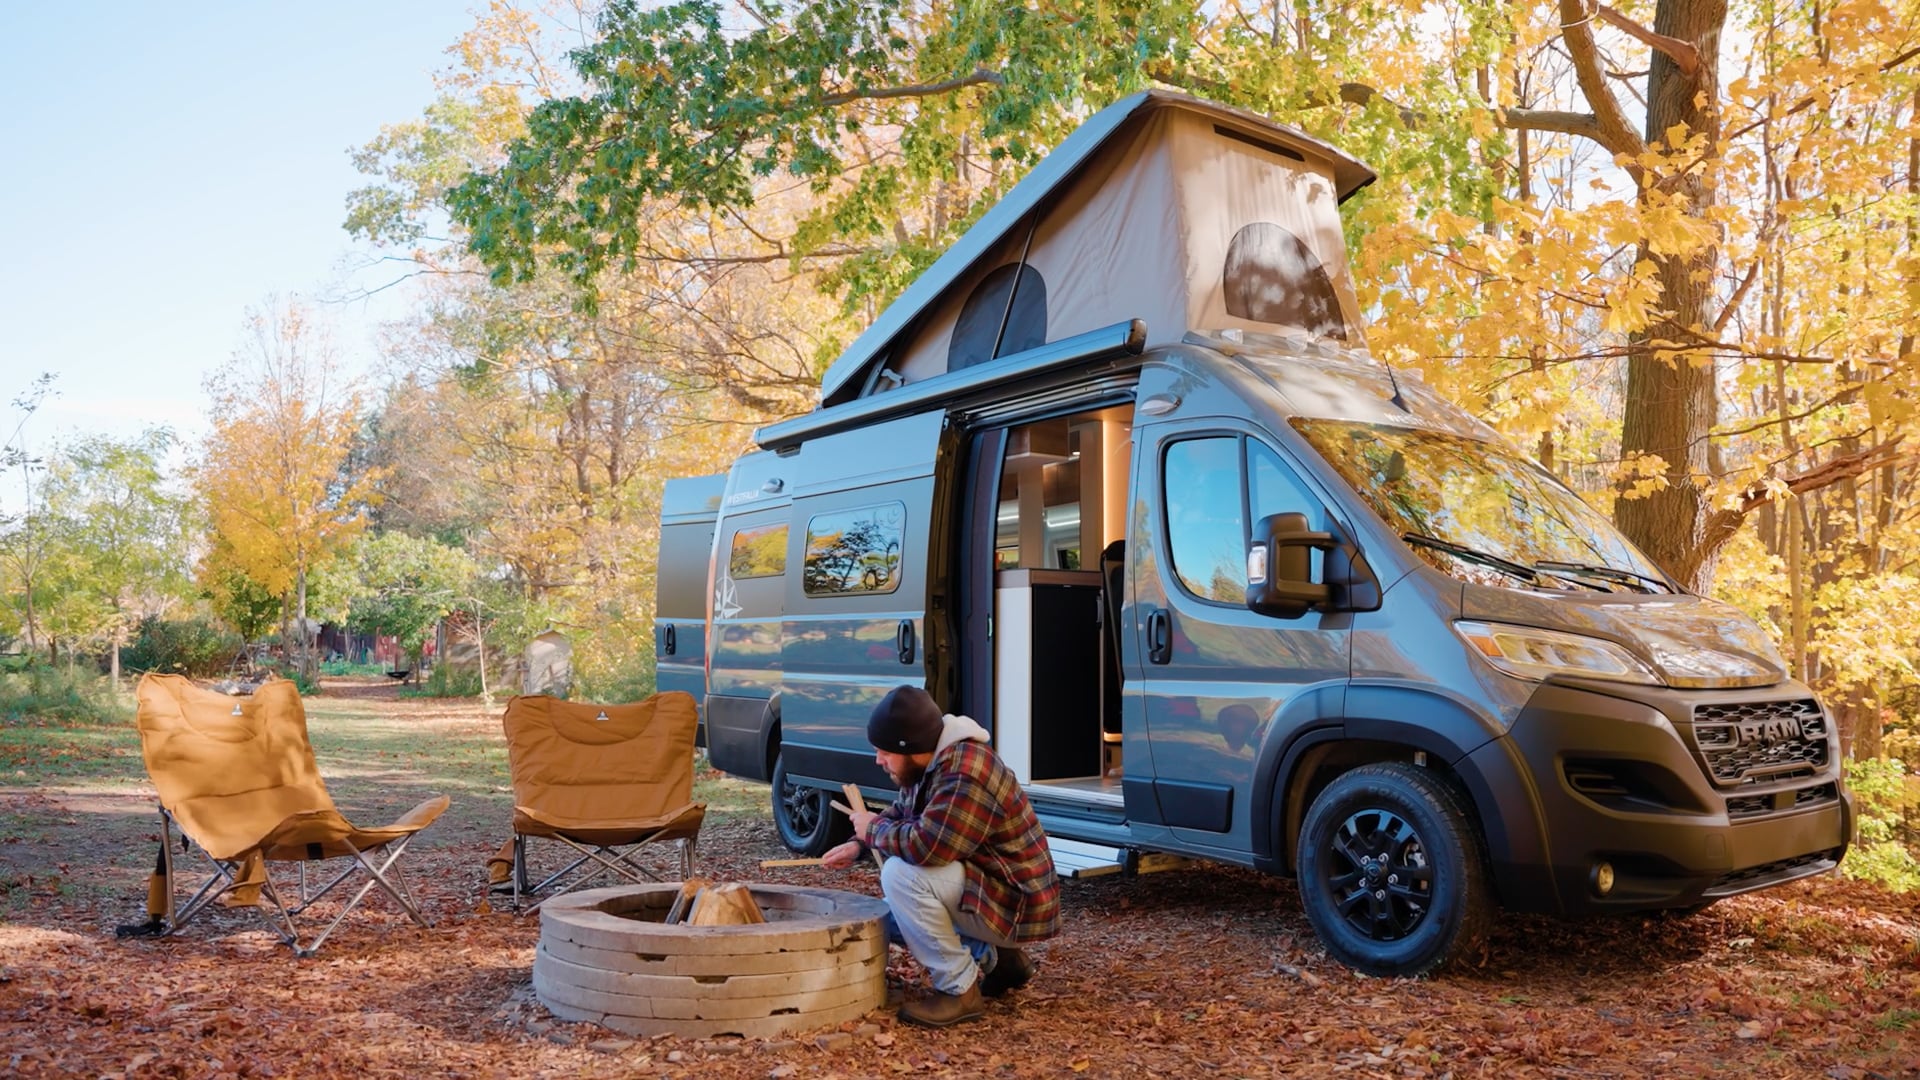 Offroad Westfalia camper van follows the compass toward the dirt, rock and  unknown